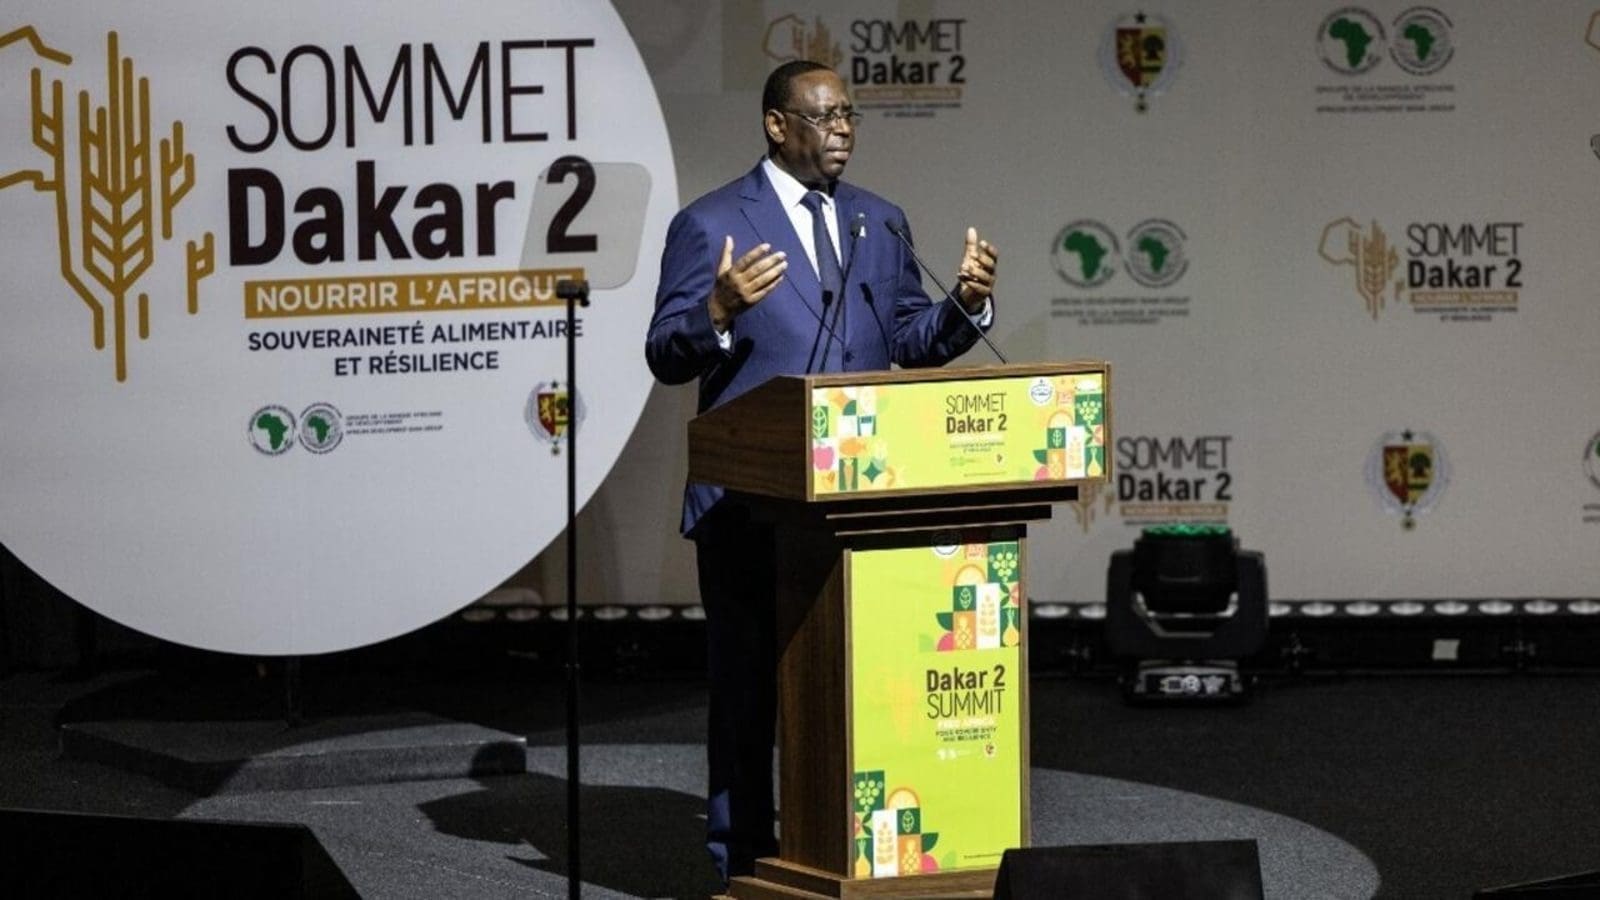 “It is time for Africa to feed Africa”, high-profiled leaders stress at Dakar II Summit